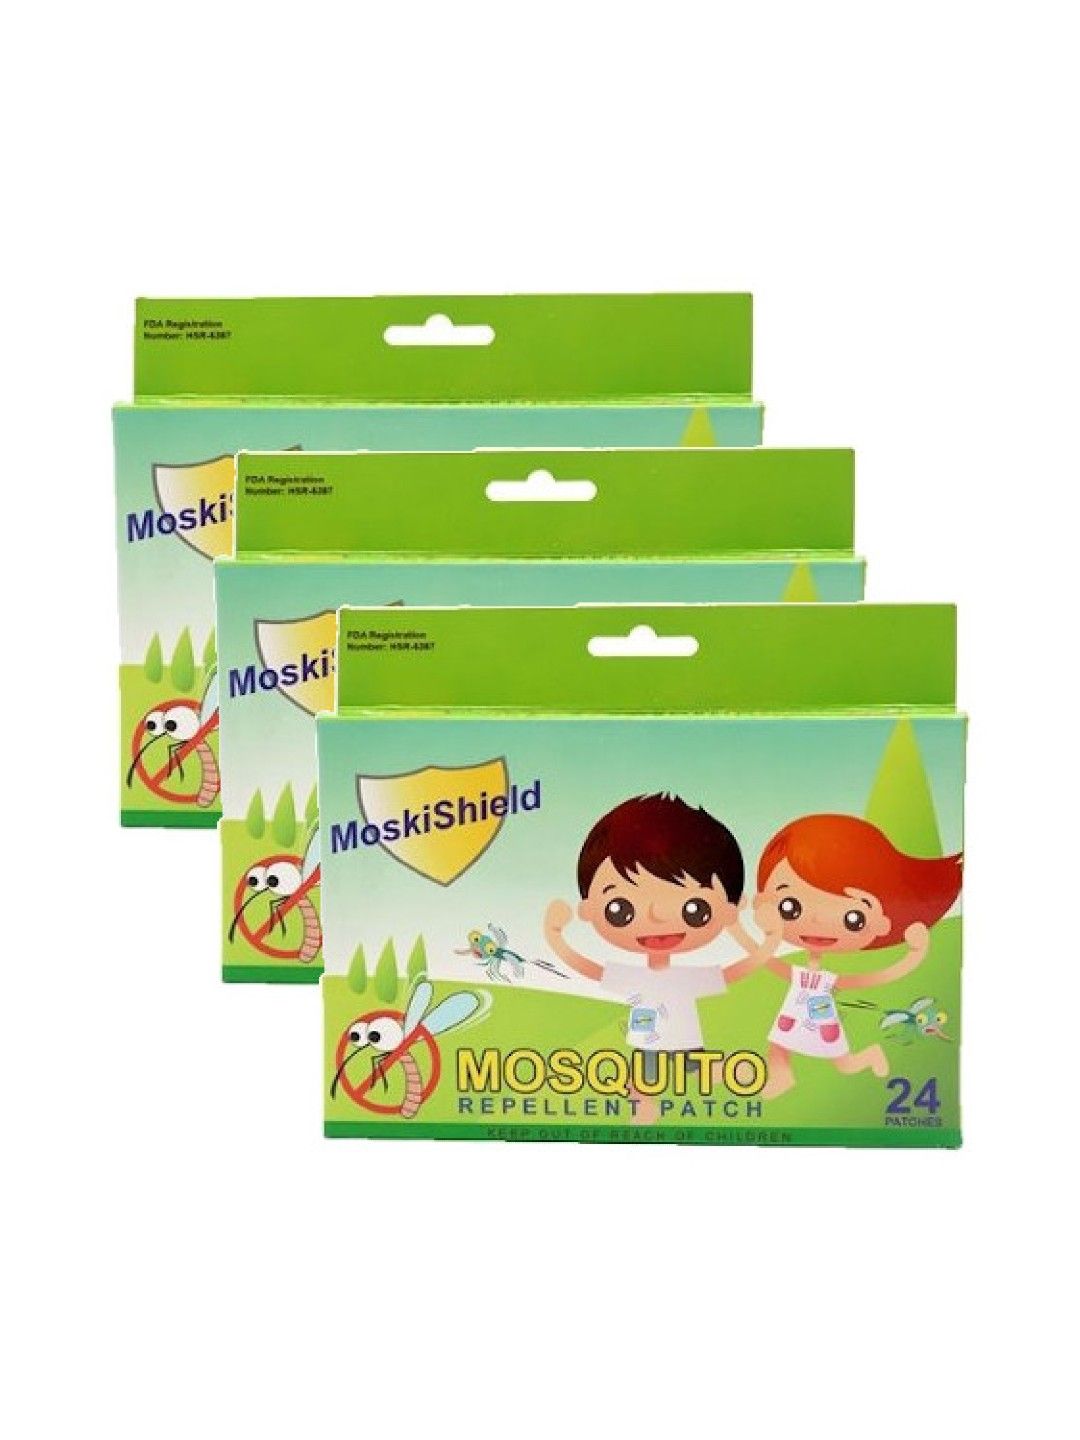 Moskishield Mosquito Repellent Patch (Set of 3)